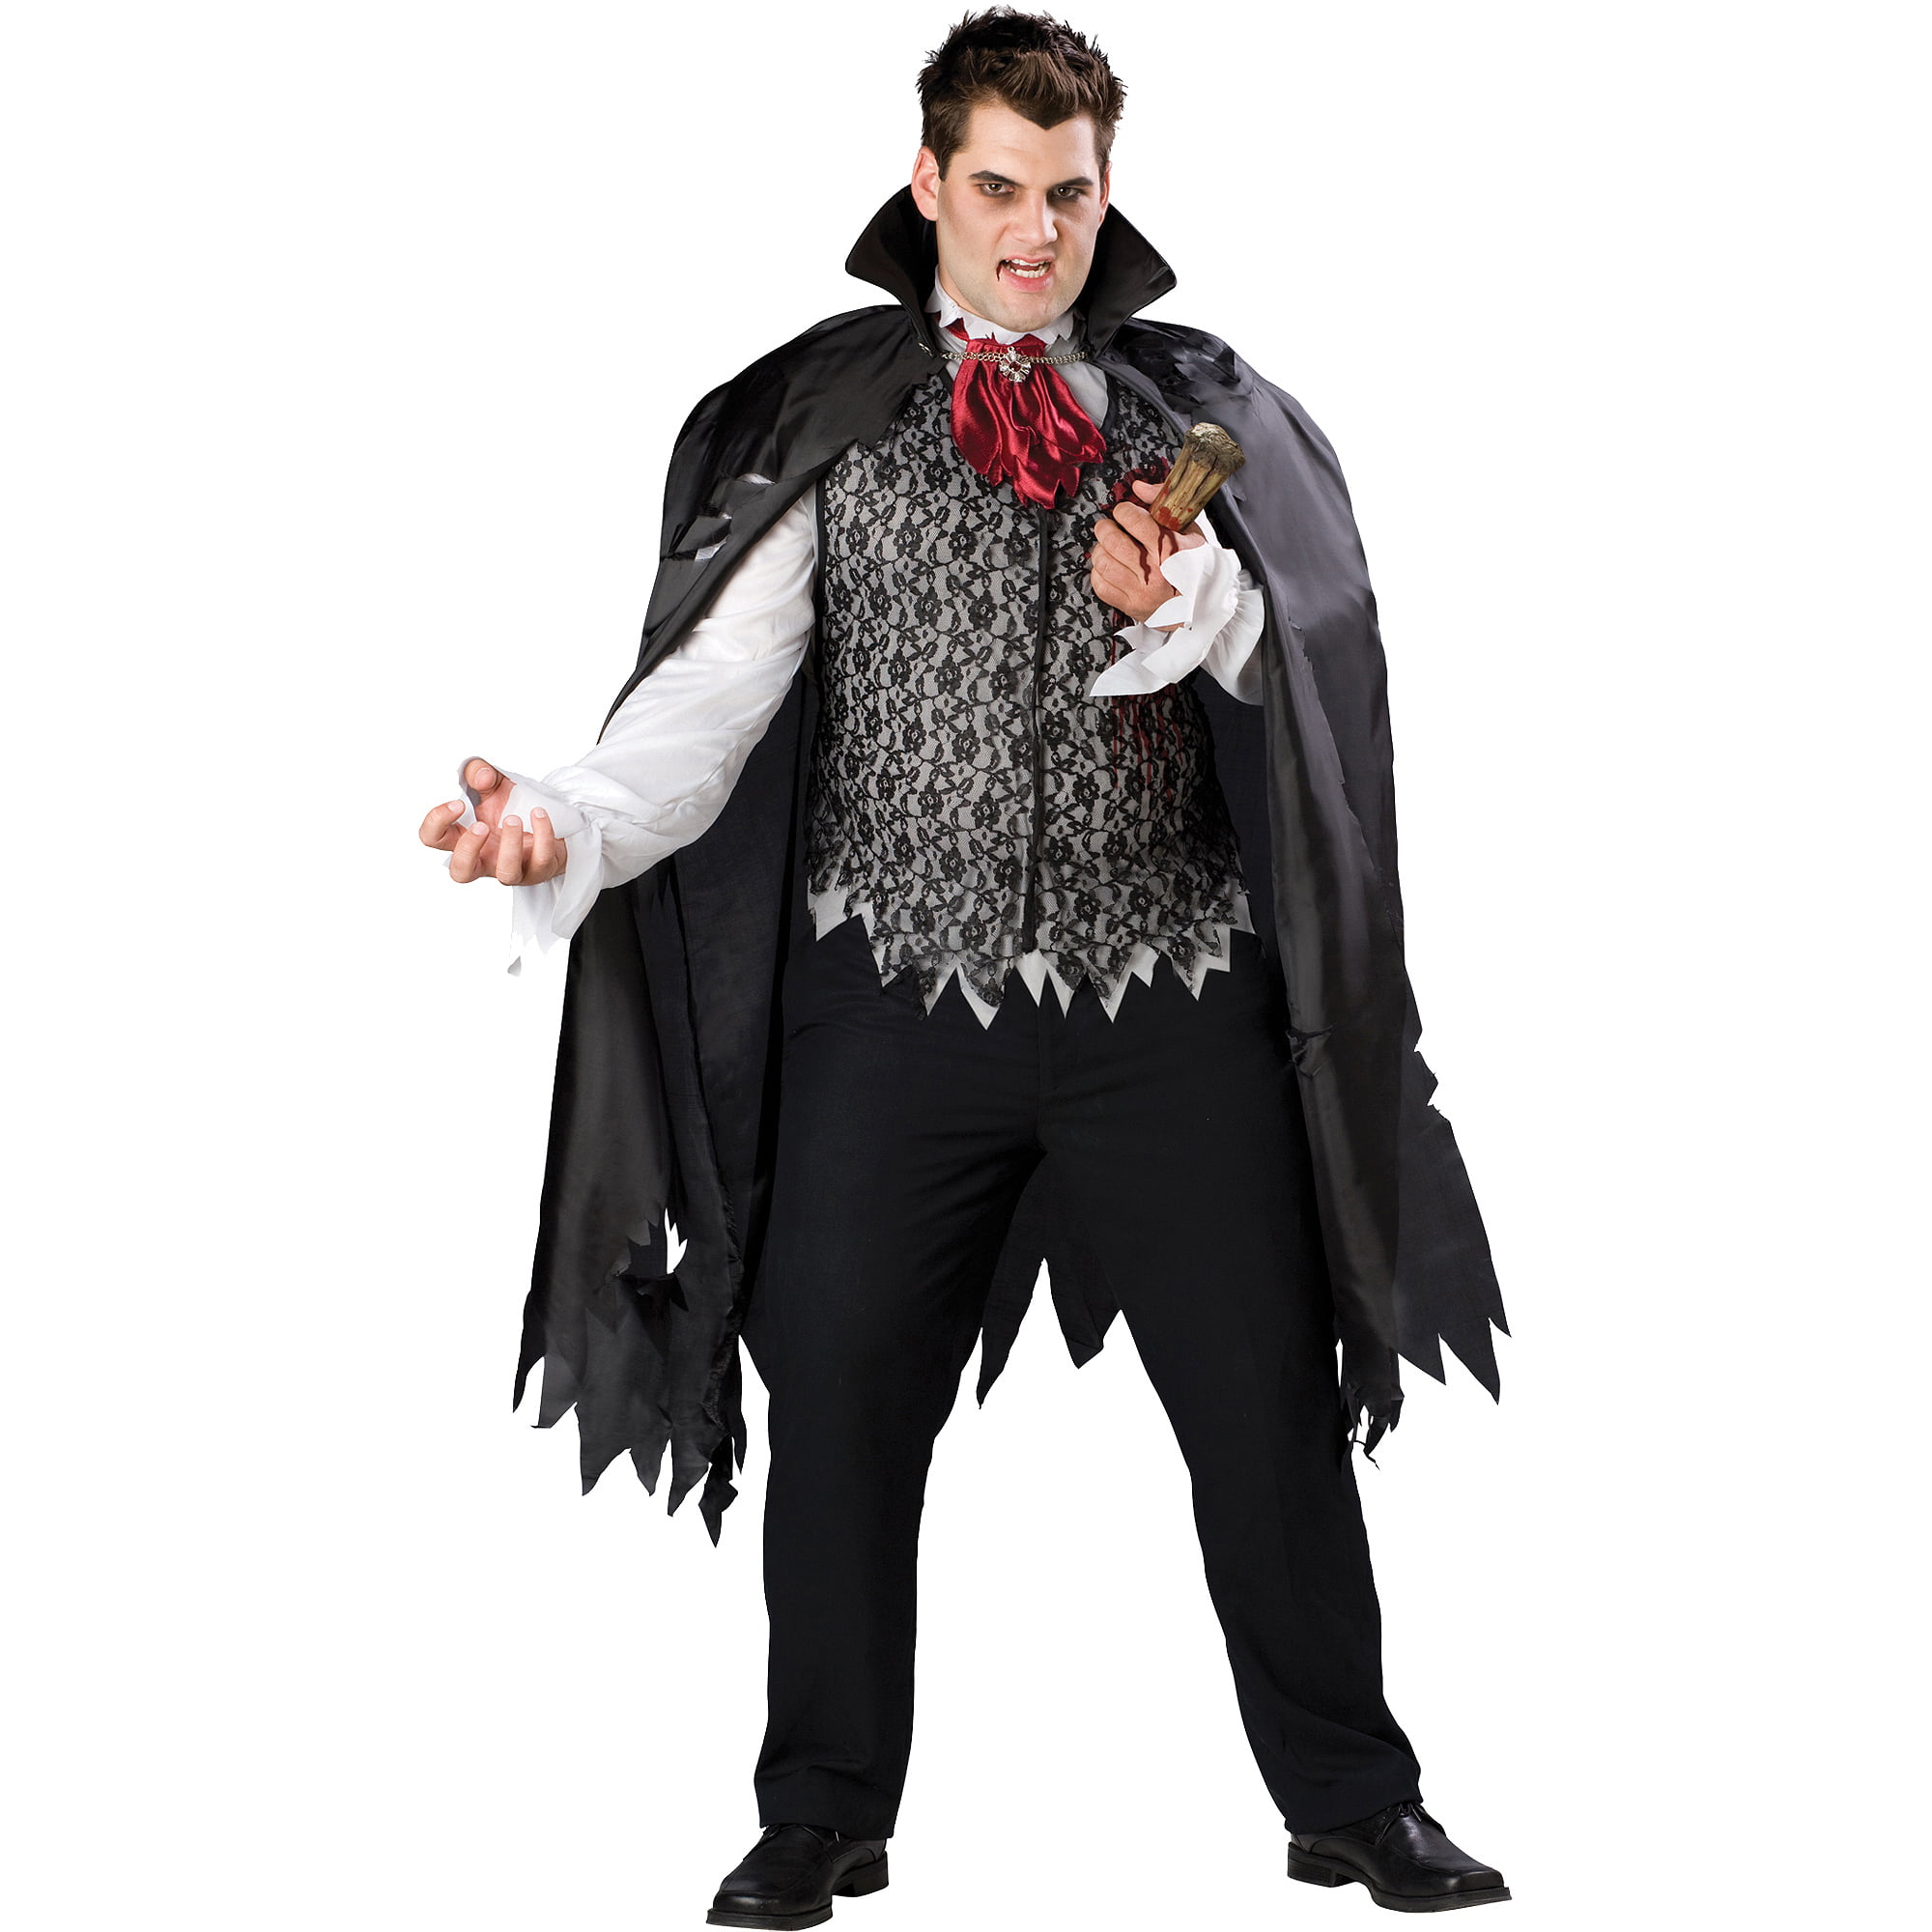 Cape With Collar 42" Long Dracula Vampire Halloween Adult Fancy Dress Costume 